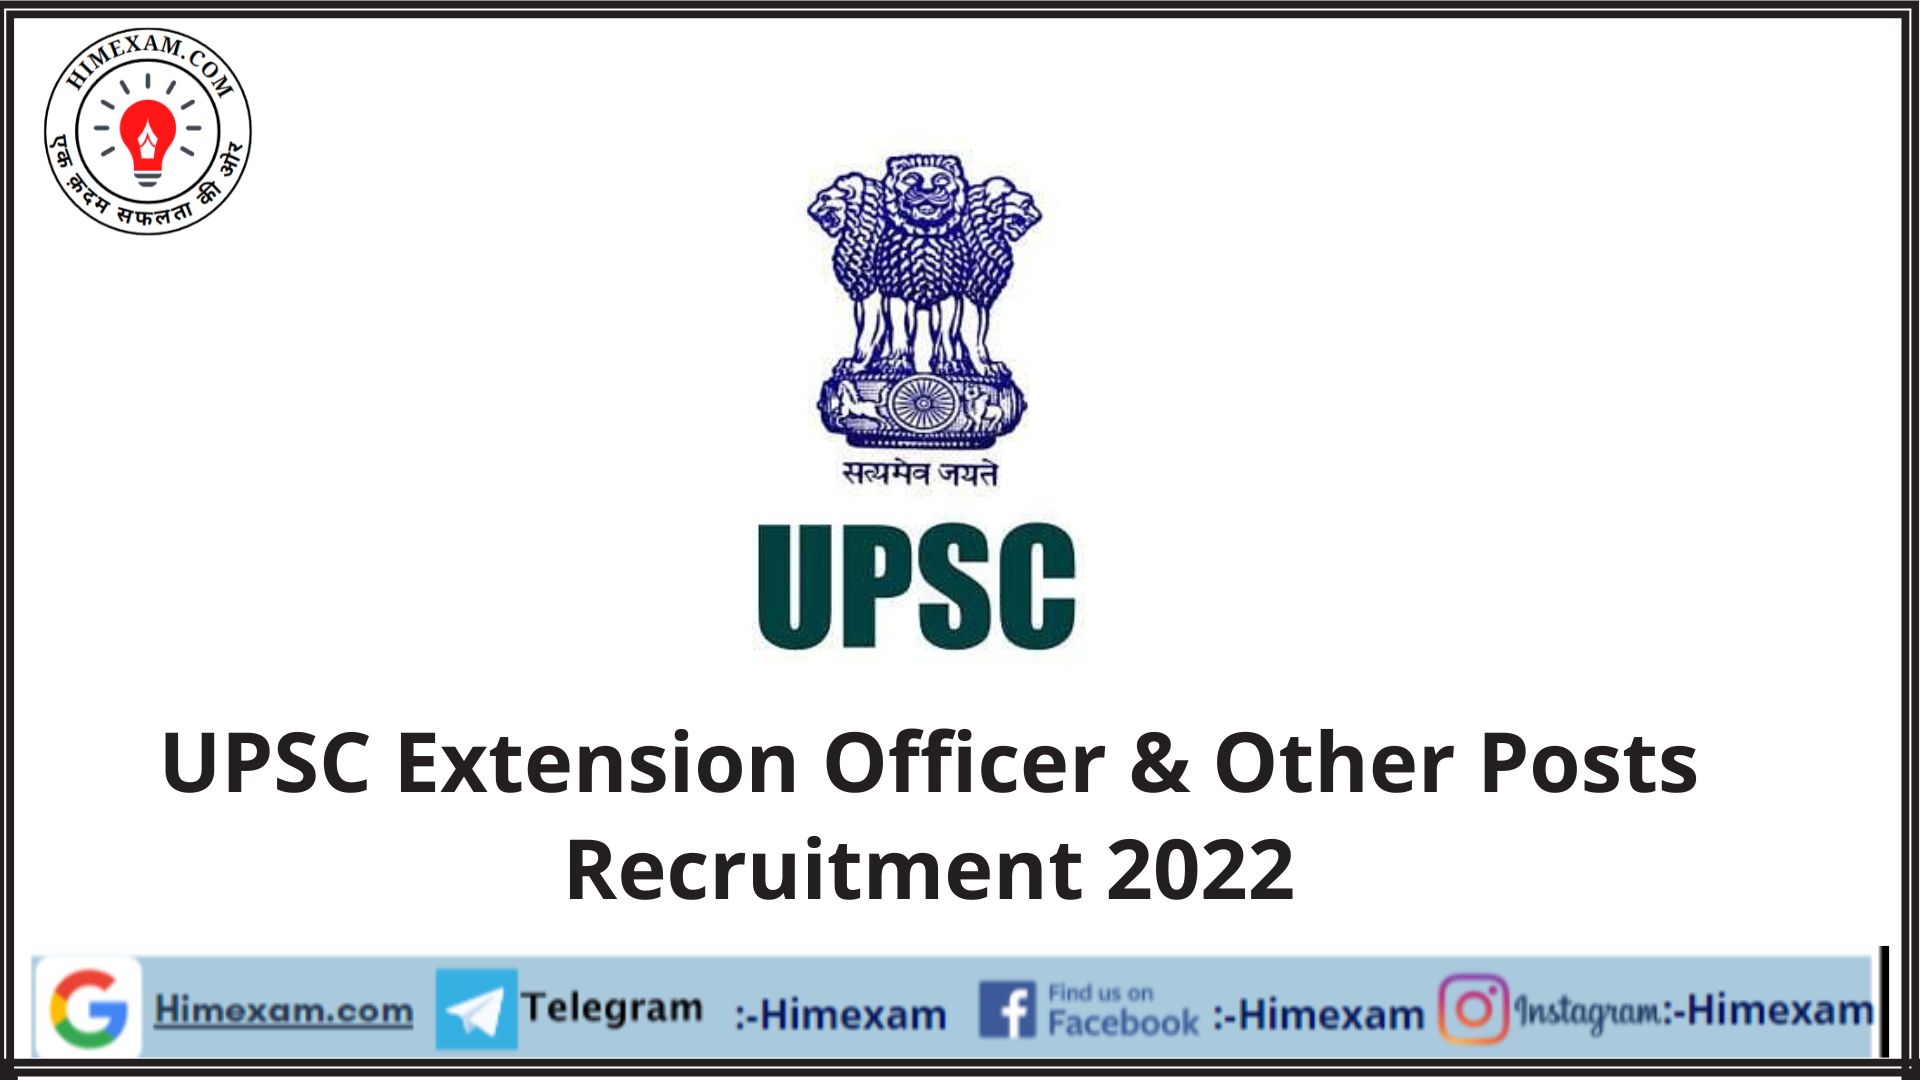 UPSC Extension Officer & Other Posts Recruitment 2022